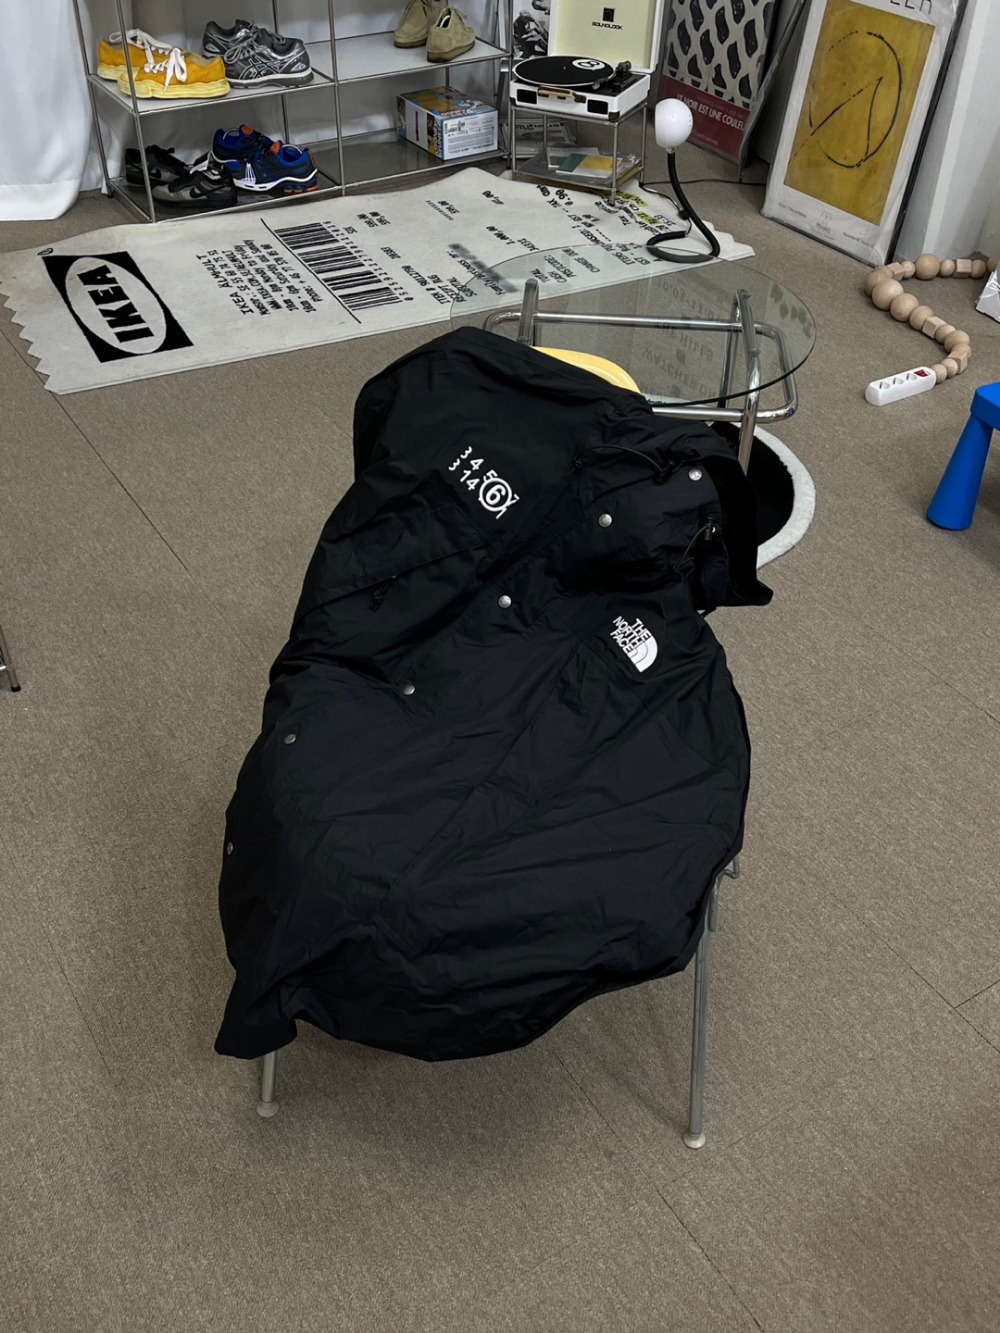 MM6 x The North Face